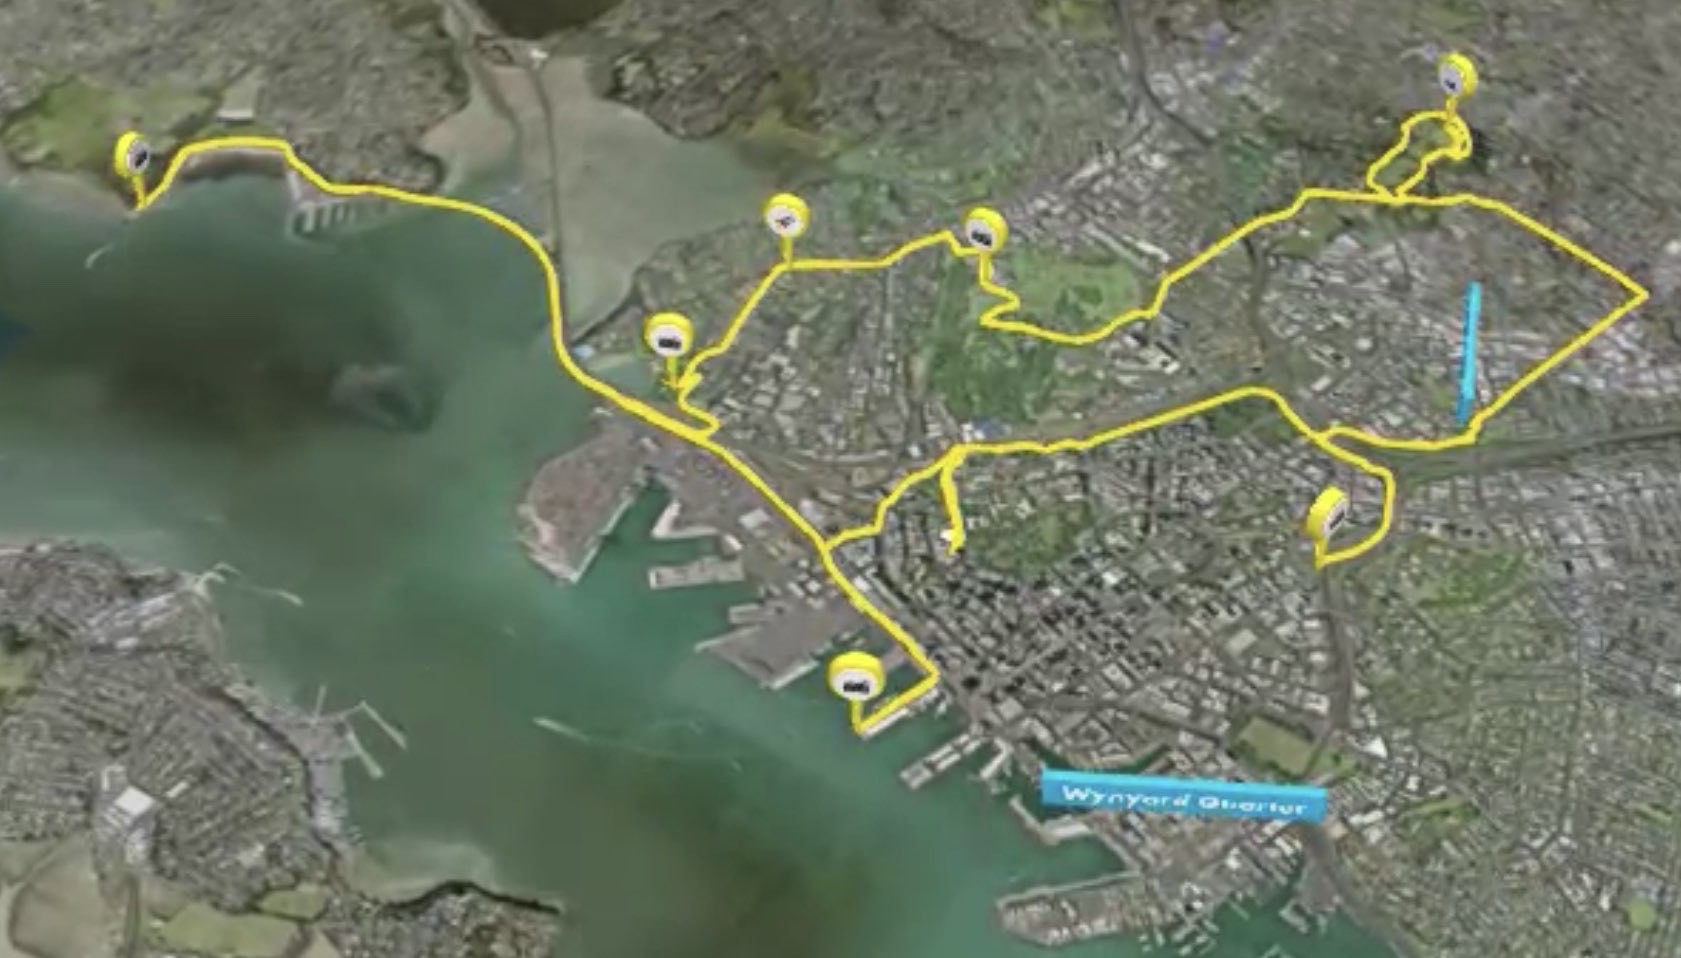 map of Auckland showing bike route as reviewed